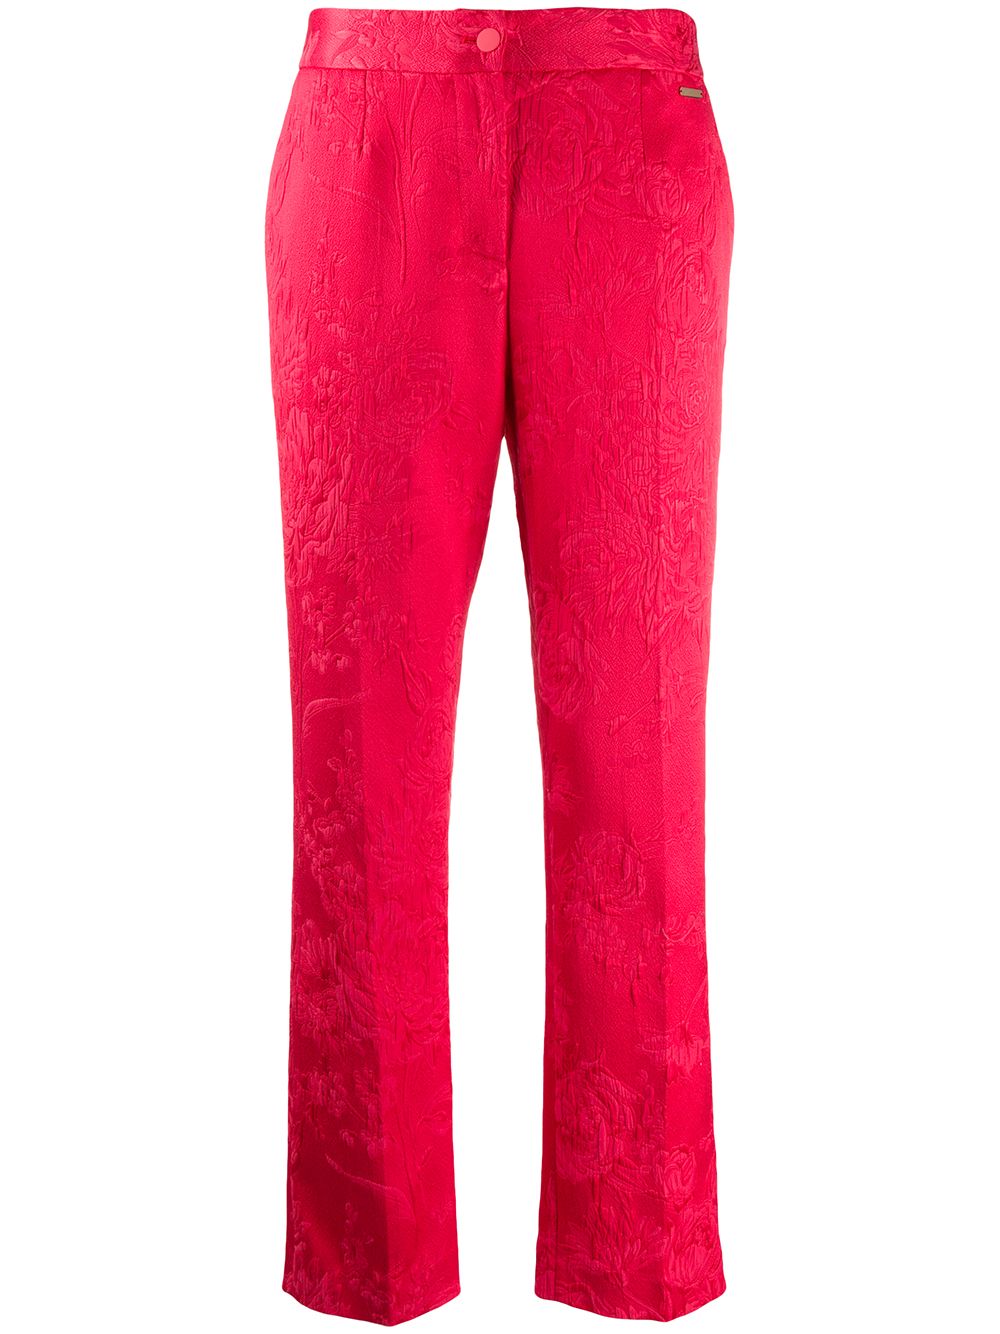 Blumarine Textured Floral Patterned Trousers In Red